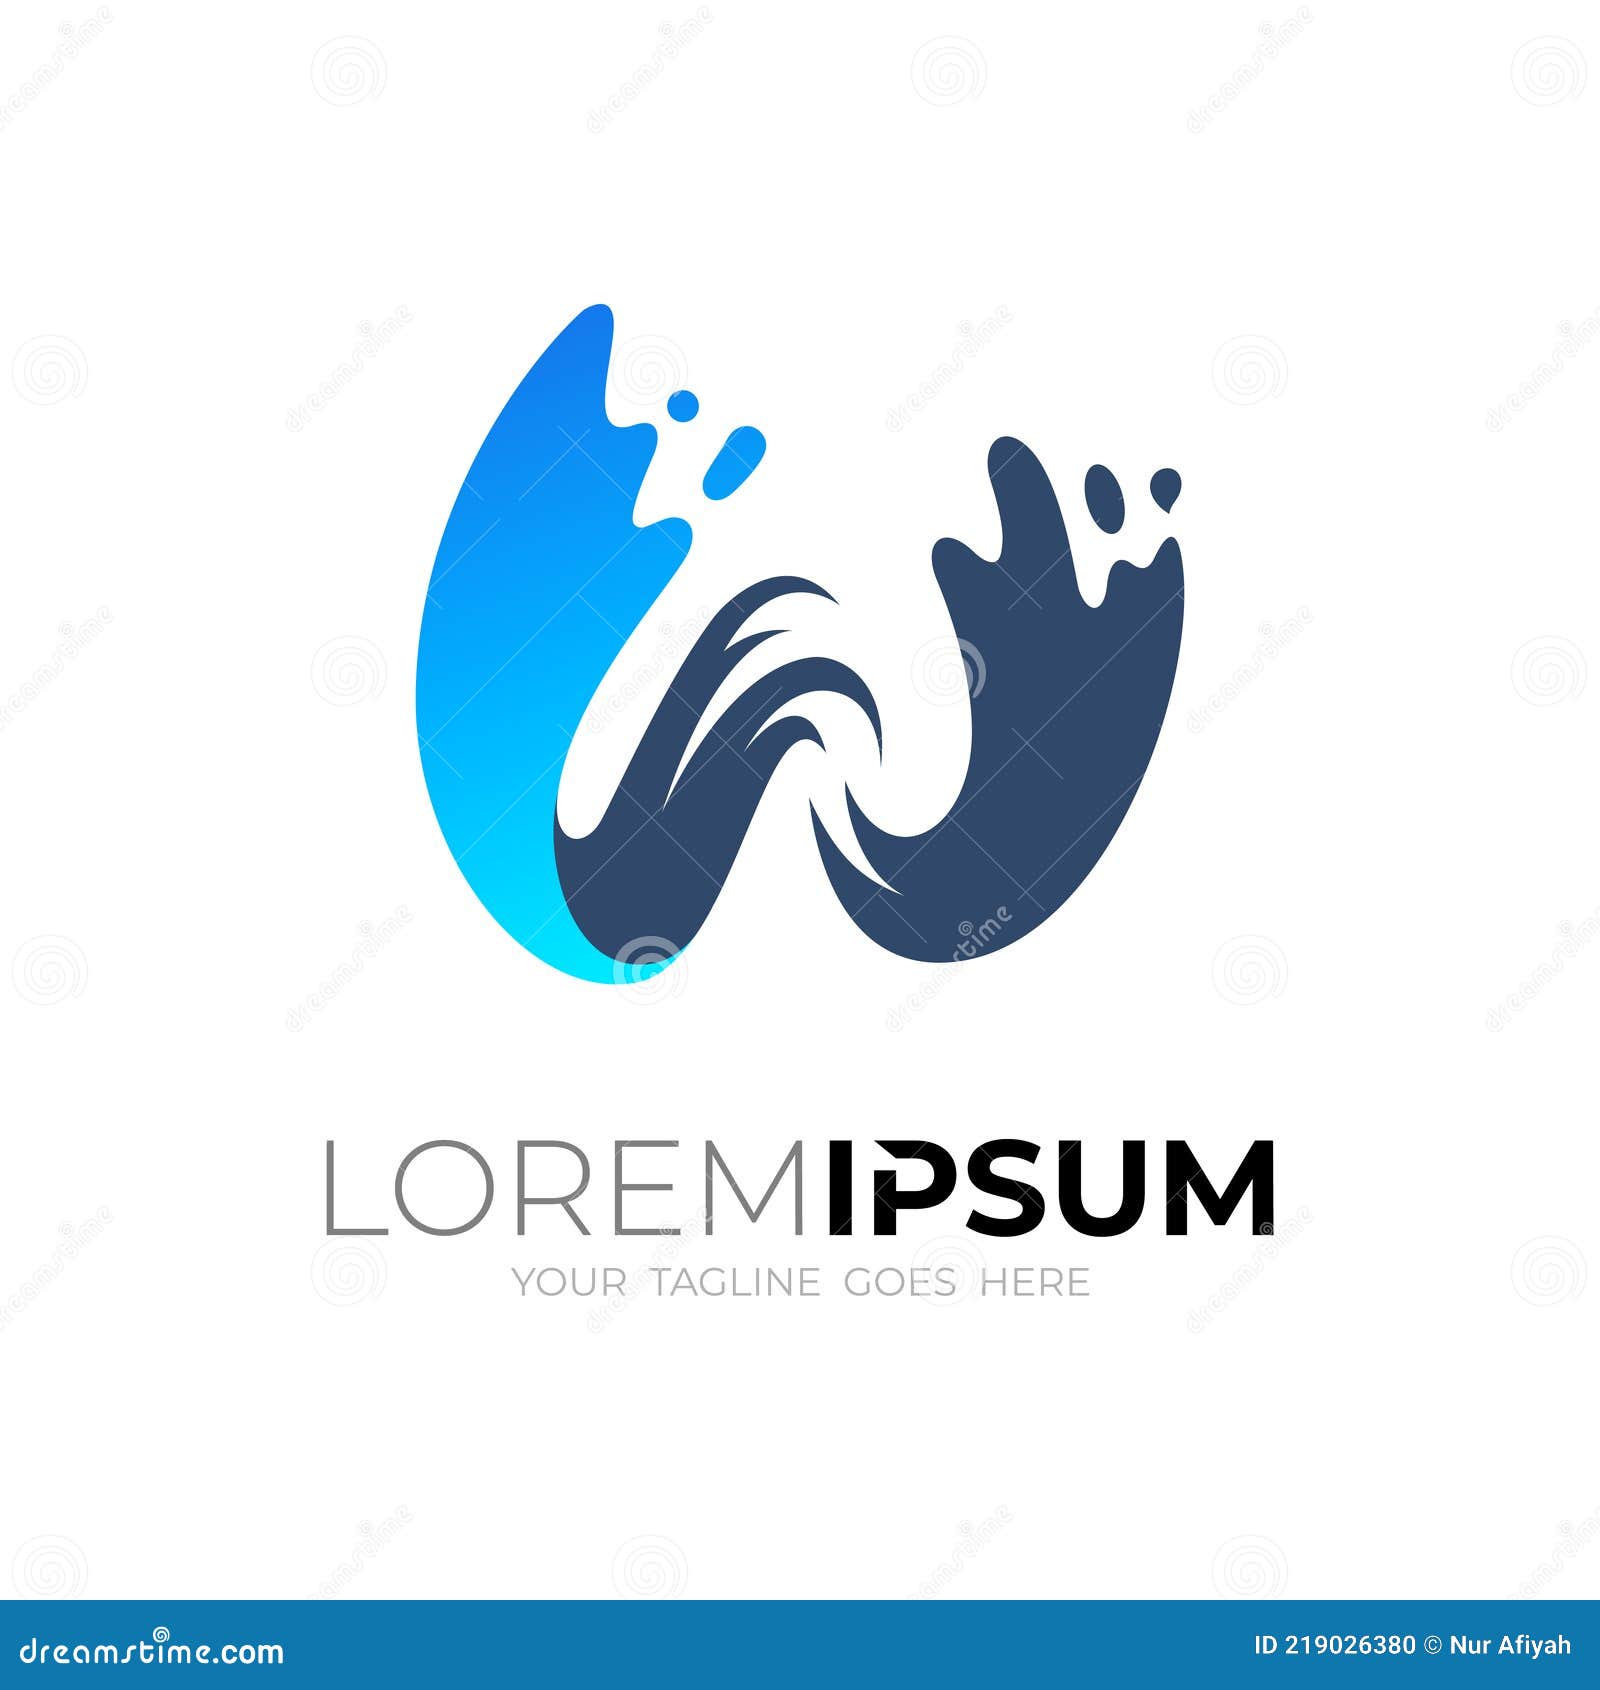 https://thumbs.dreamstime.com/z/letter-w-logo-water-swoosh-icon-template-simple-style-219026380.jpg